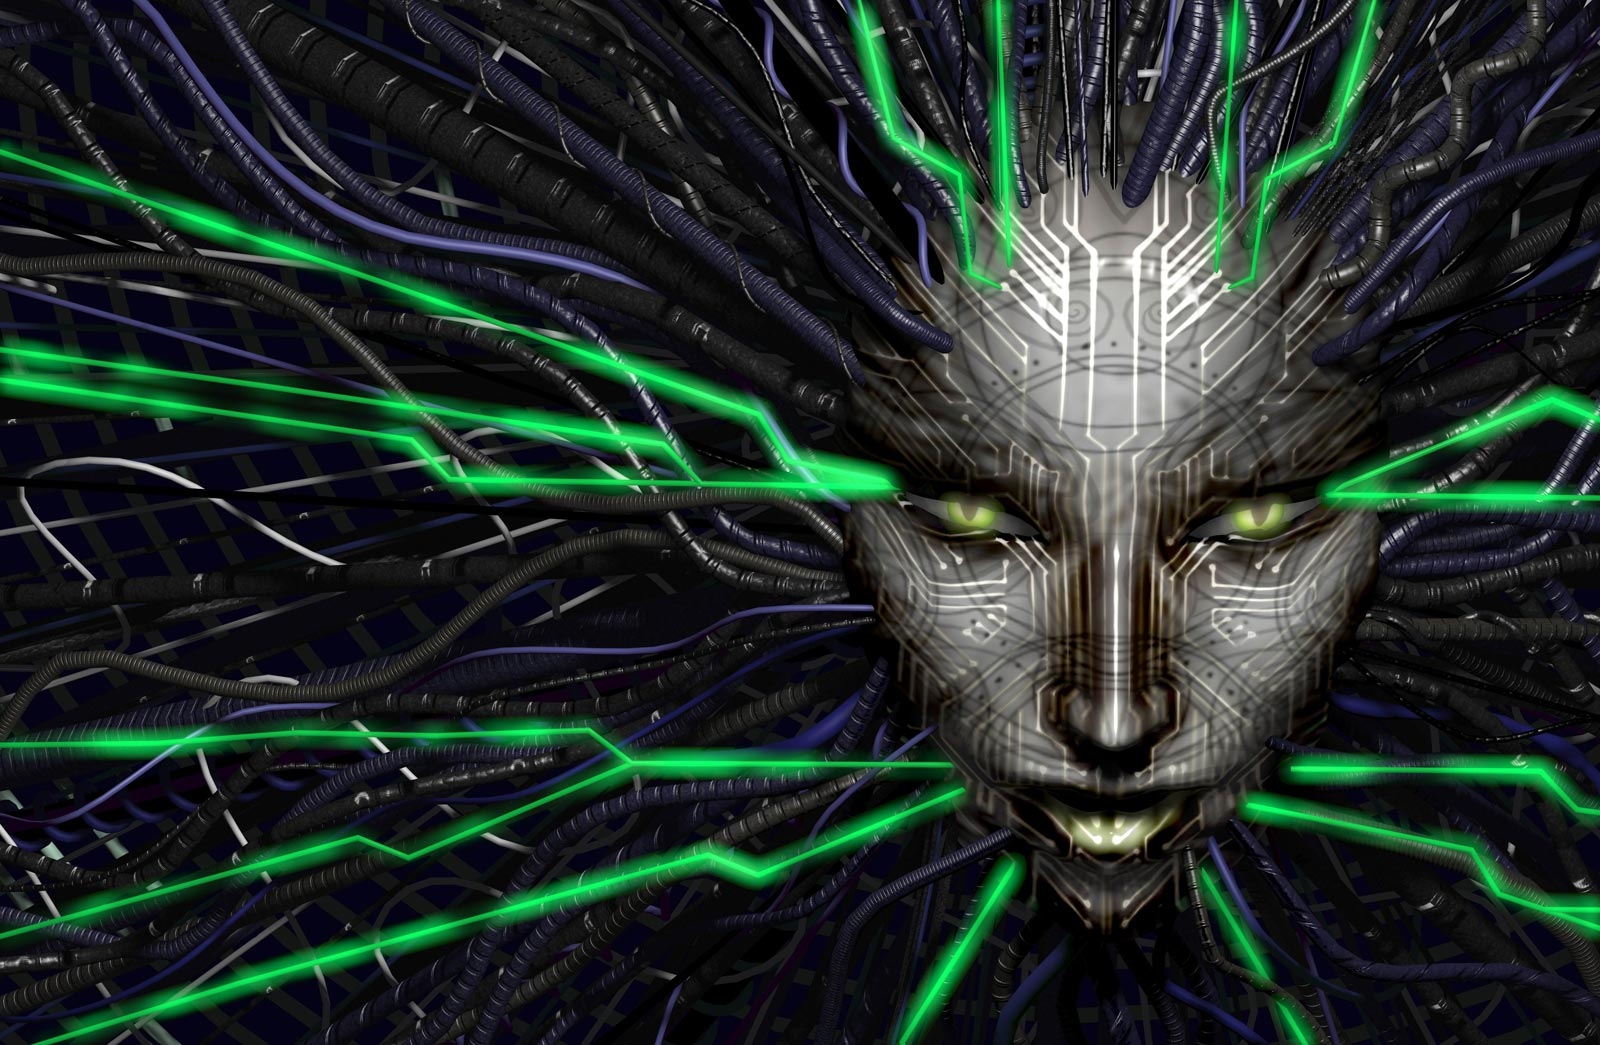 New Footage Revealed for “System Shock” Remaster